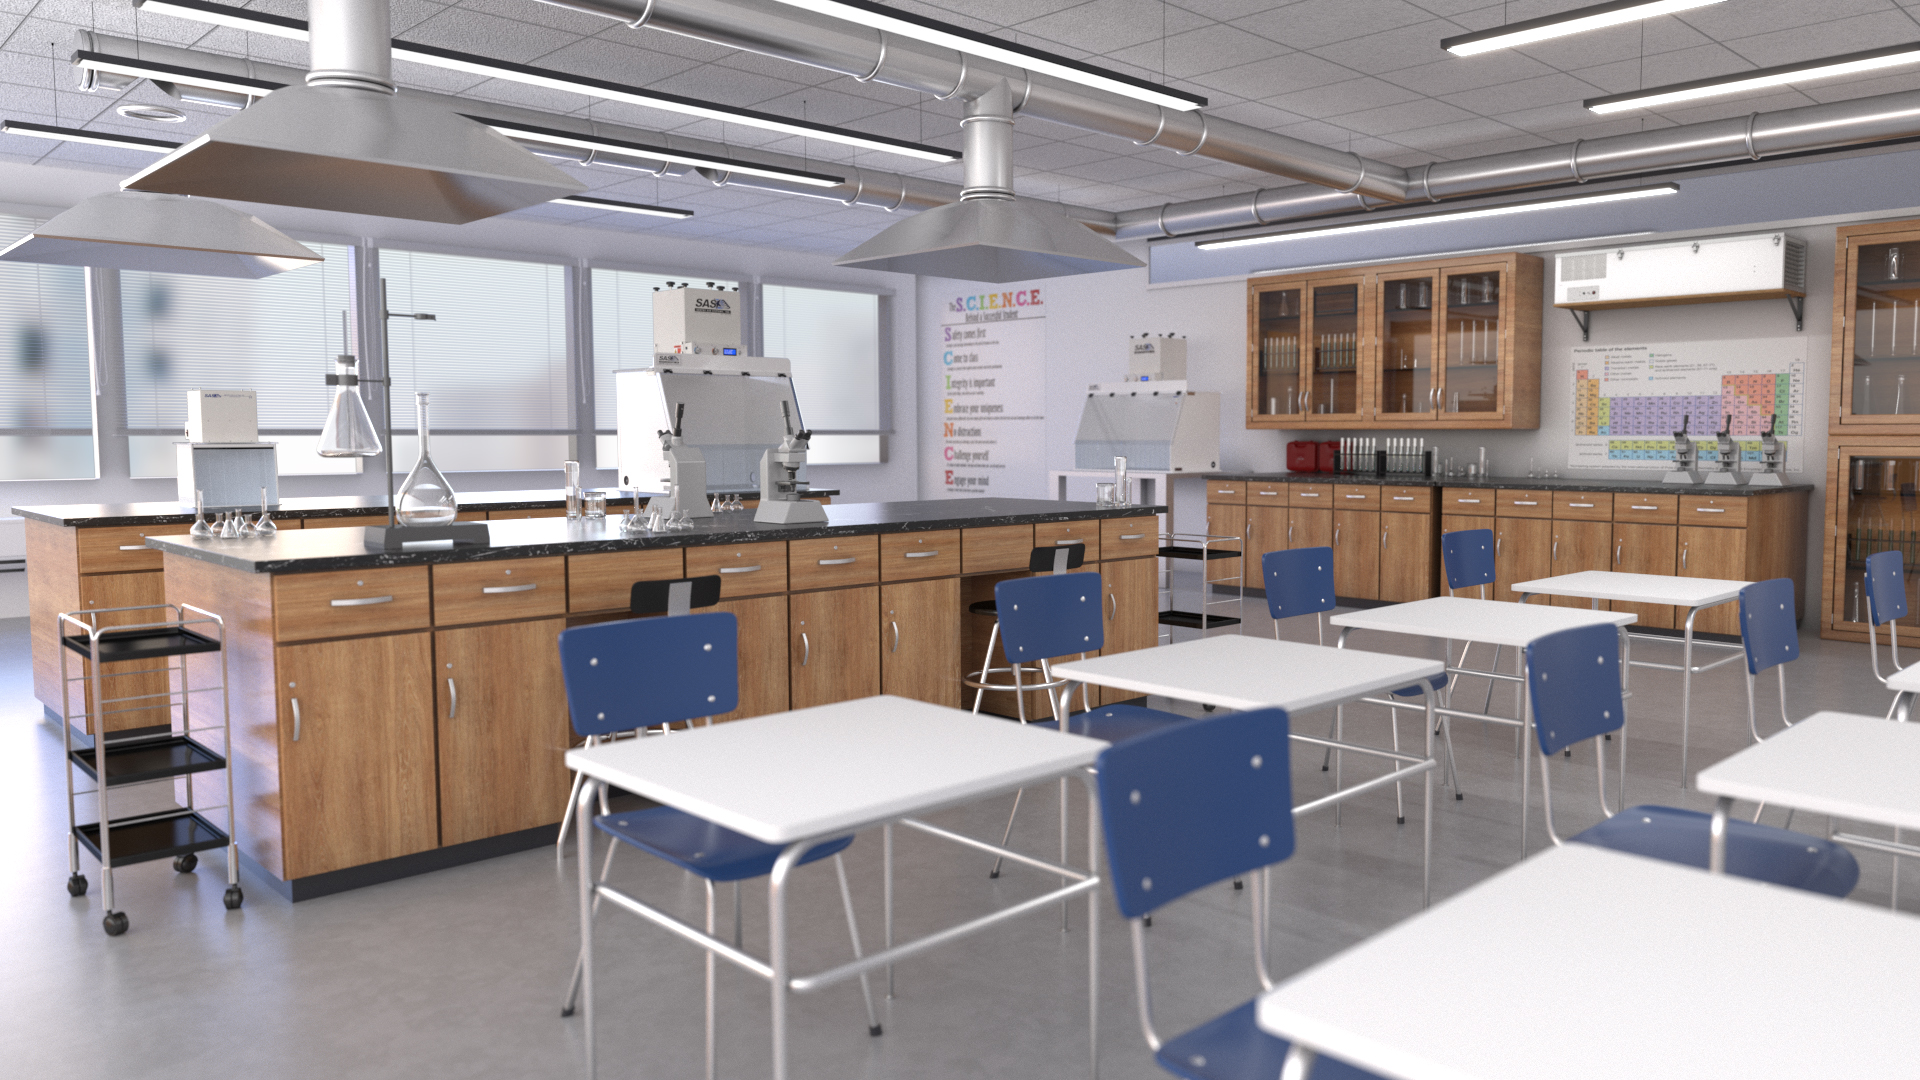 UV Air Purifiers help reduce disease transmission in classroom labs